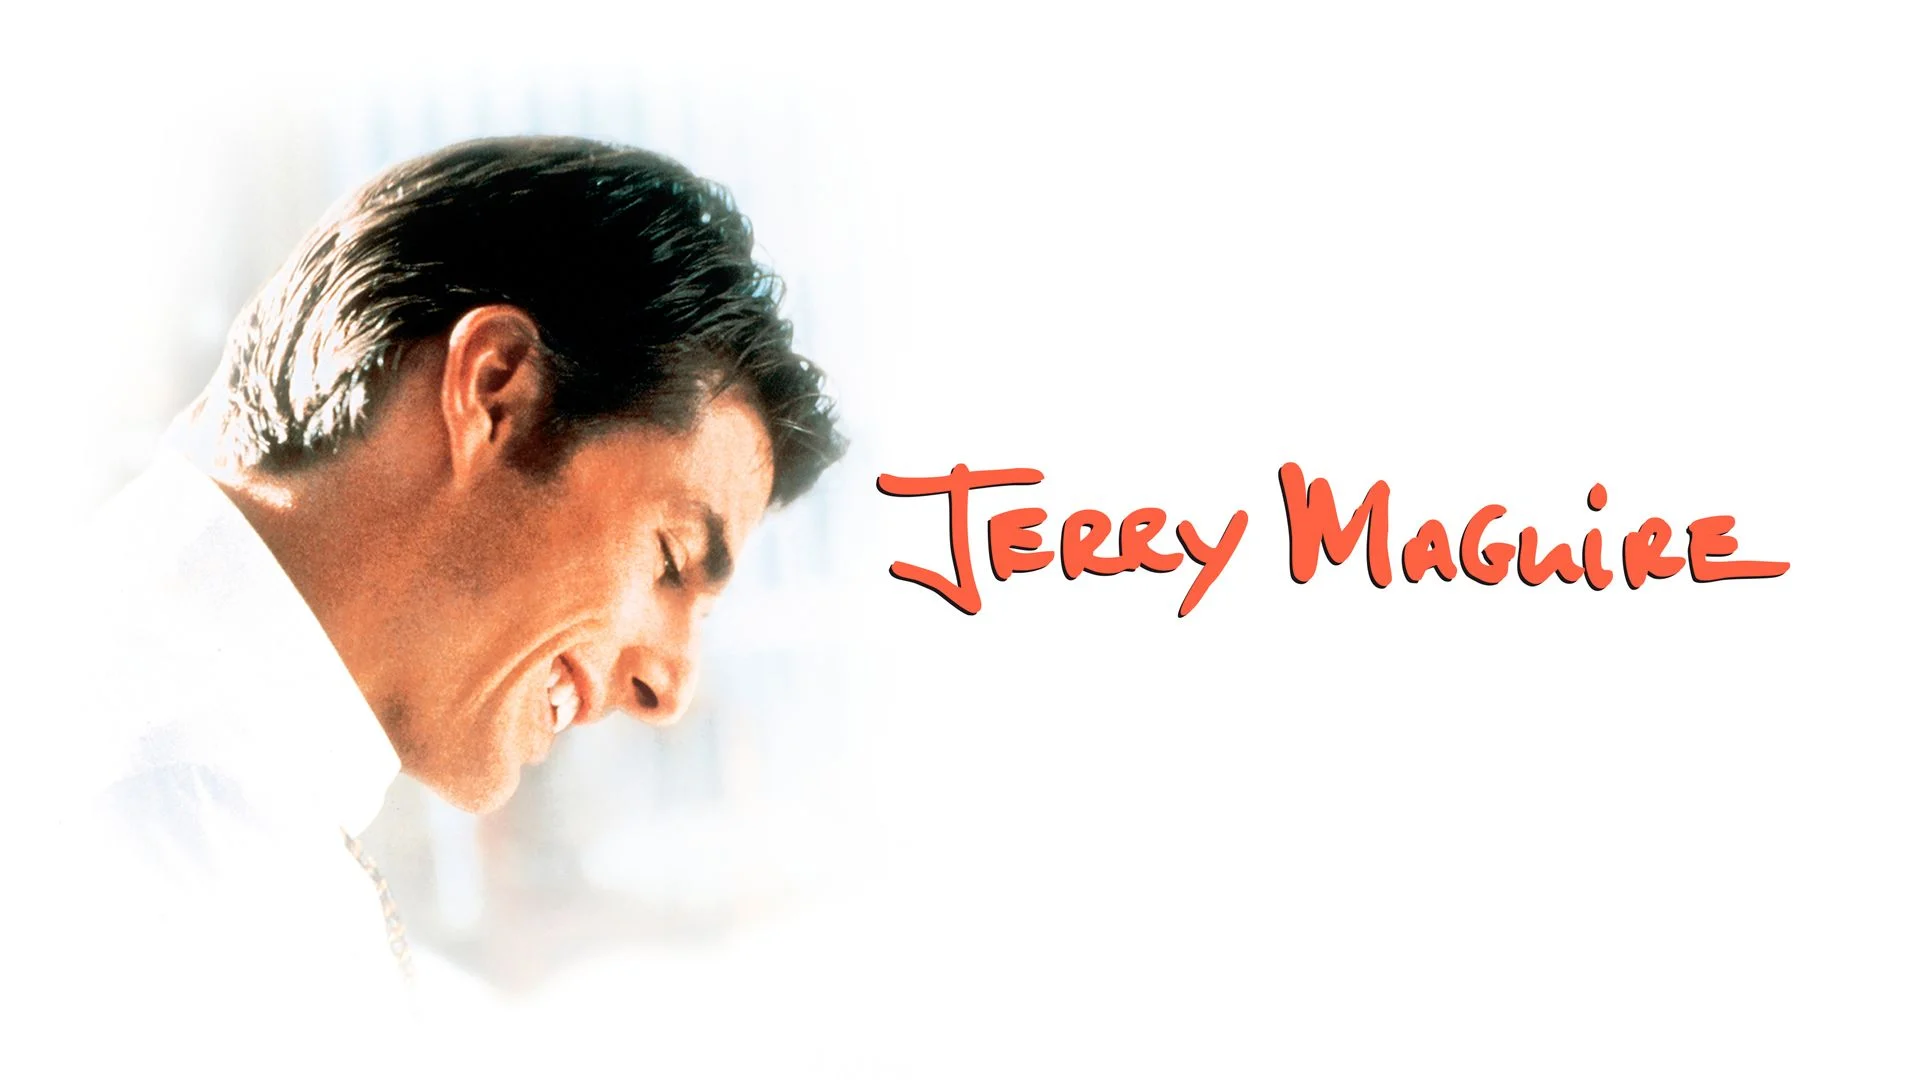 Tom Cruise Movies: Jerry Maguire